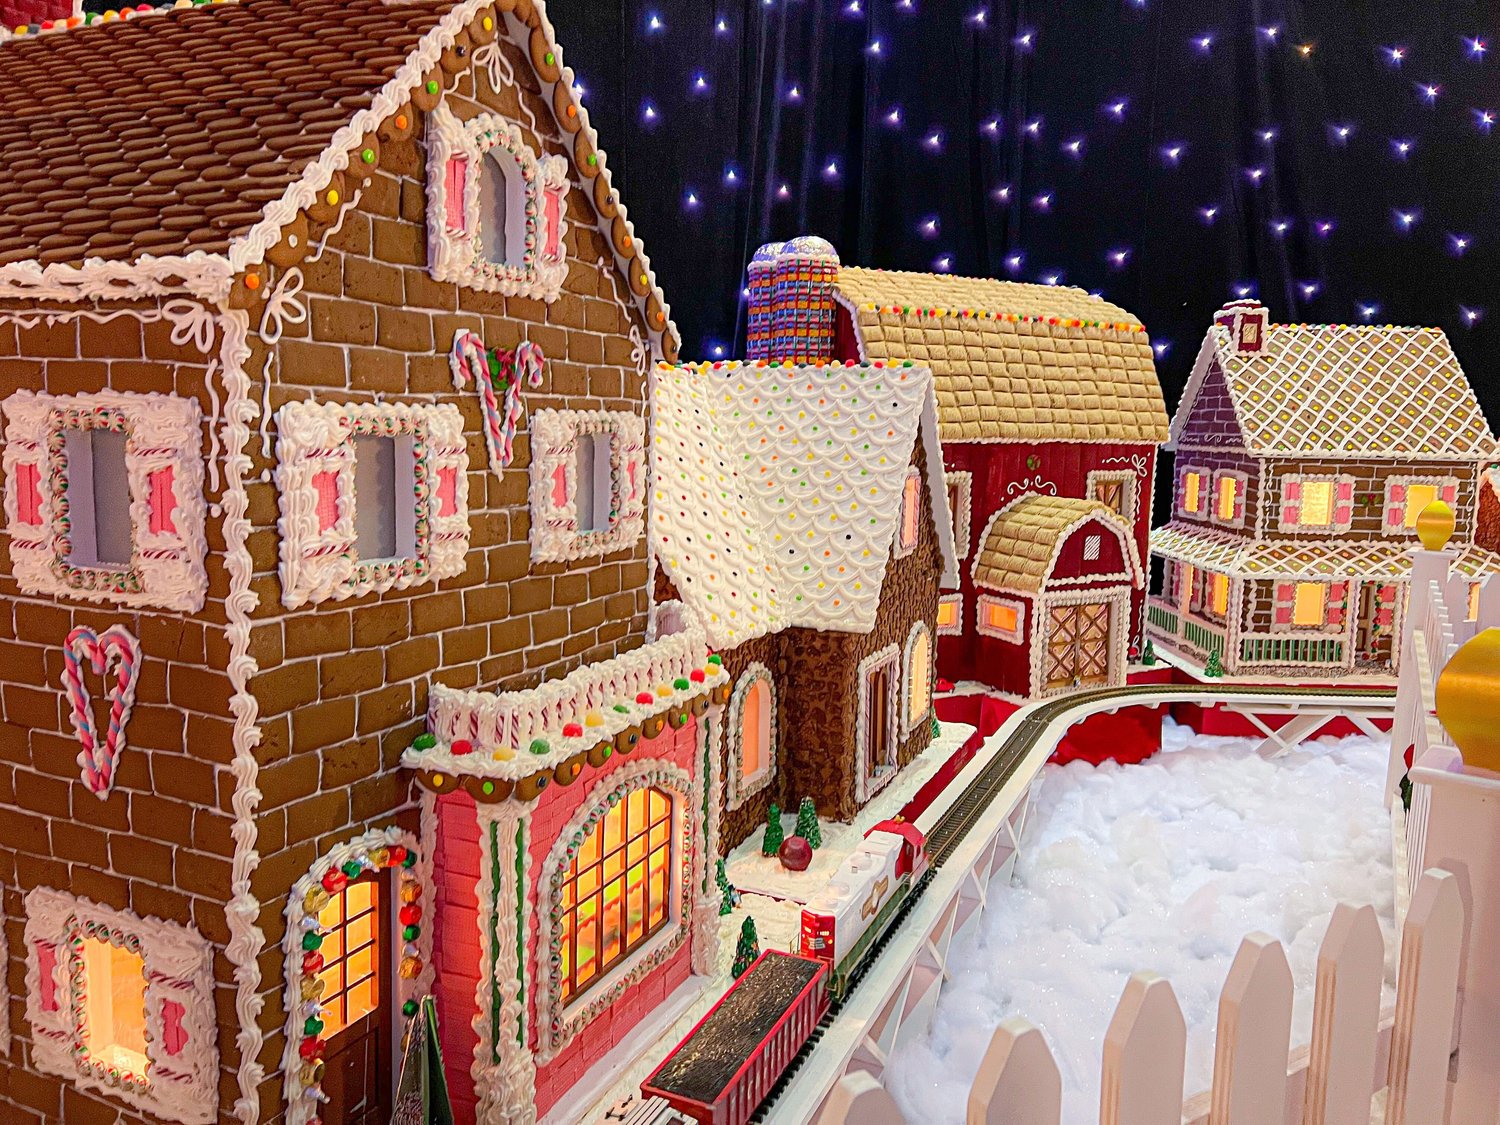 Turning Stone’s award-winning pastry team designed this year’s Gingerbread Village with a nod to traditional nostalgic gingerbread houses by incorporating popular candies including NECCO wafers, pinwheel mints, and Spree tart candy.